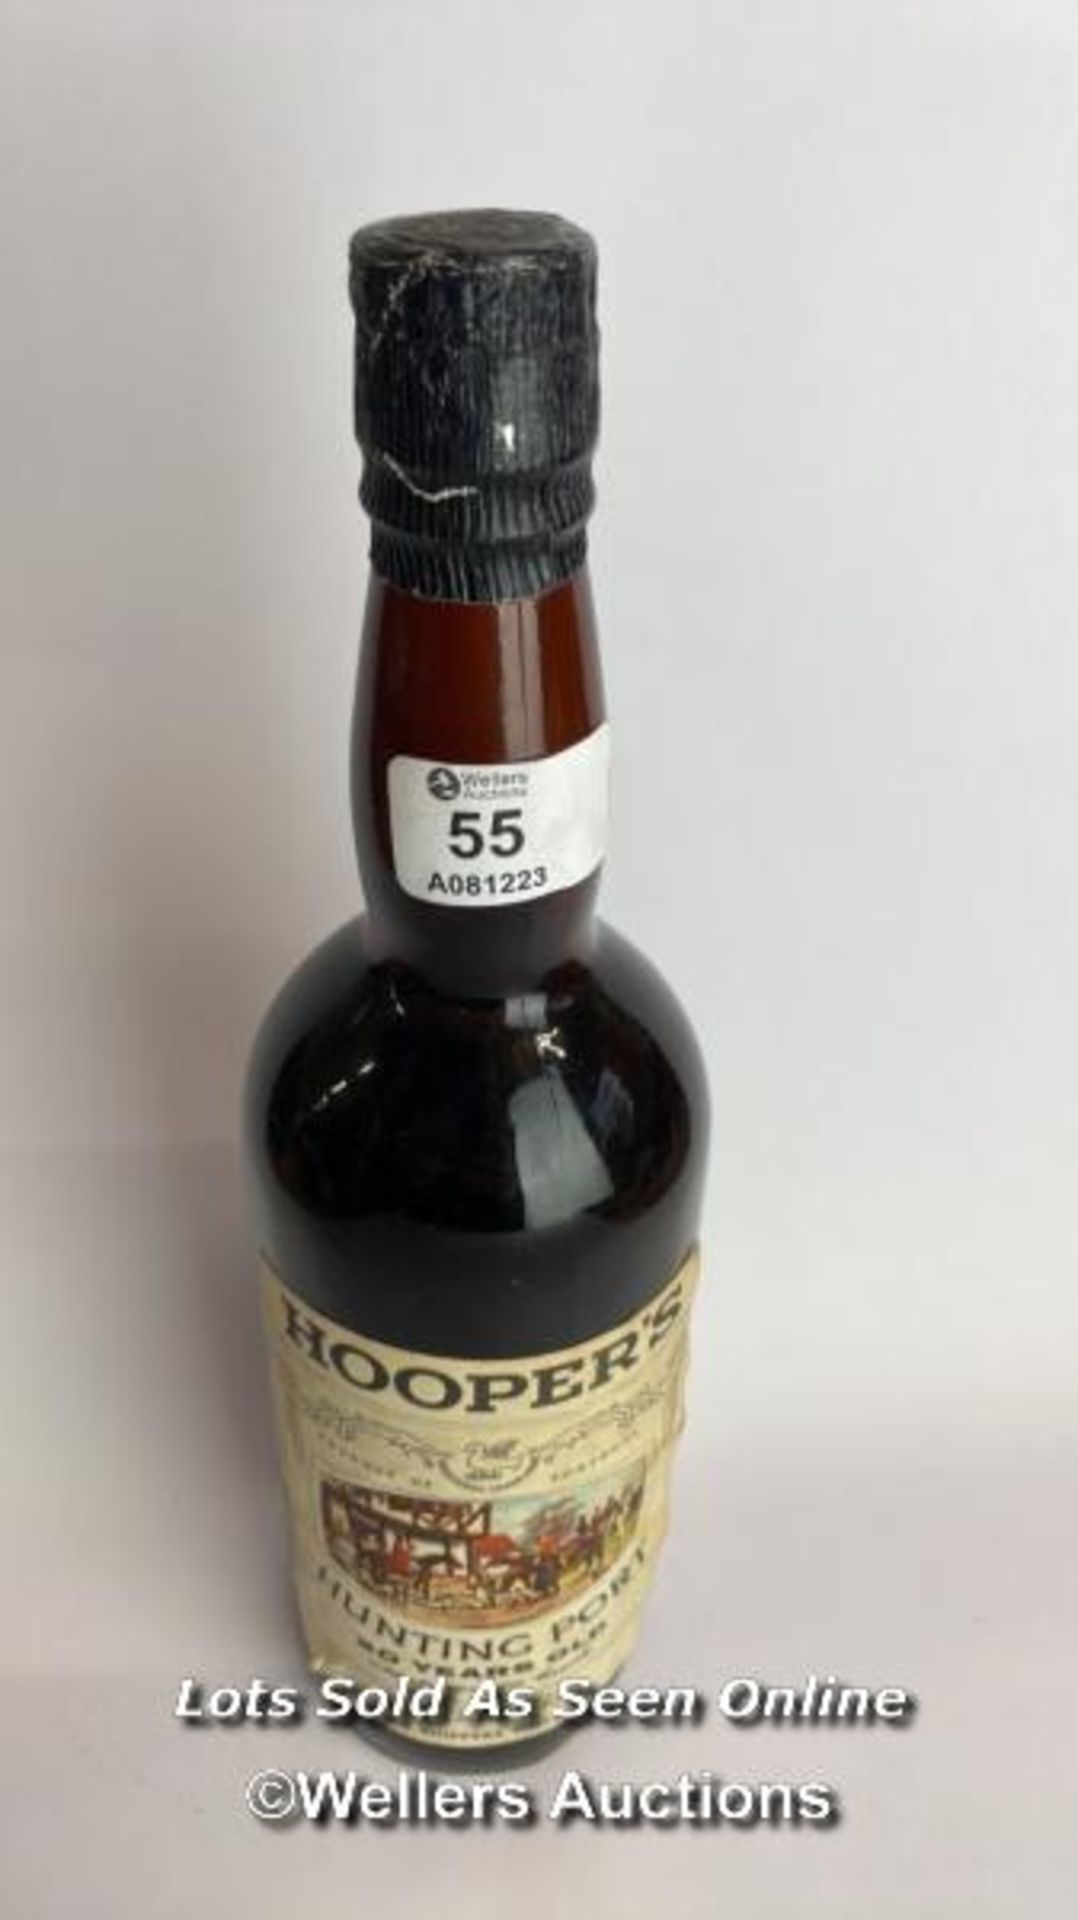 Hooper's Hunting Port, 20 years old and matured in cask / Please see images for fill level and - Image 3 of 4